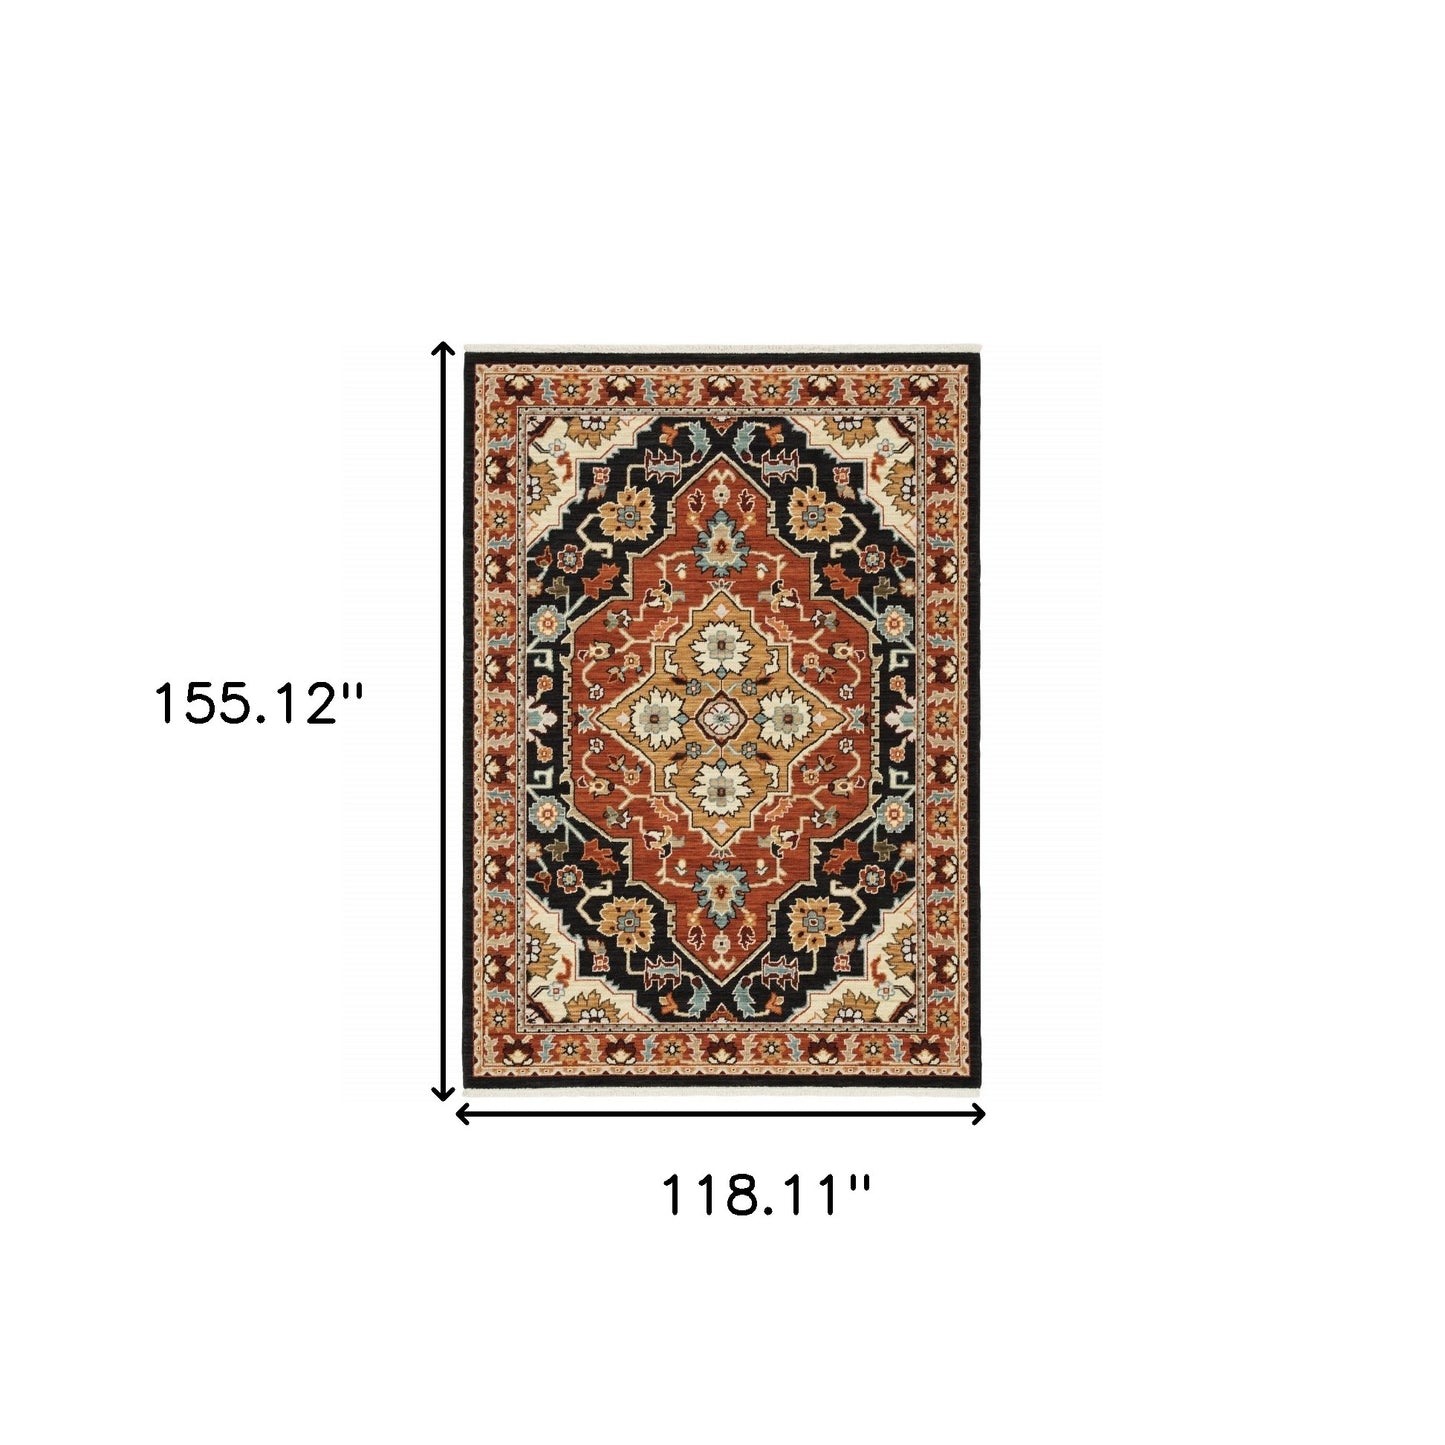 10' x 13' Red and Black Oriental Power Loom Area Rug